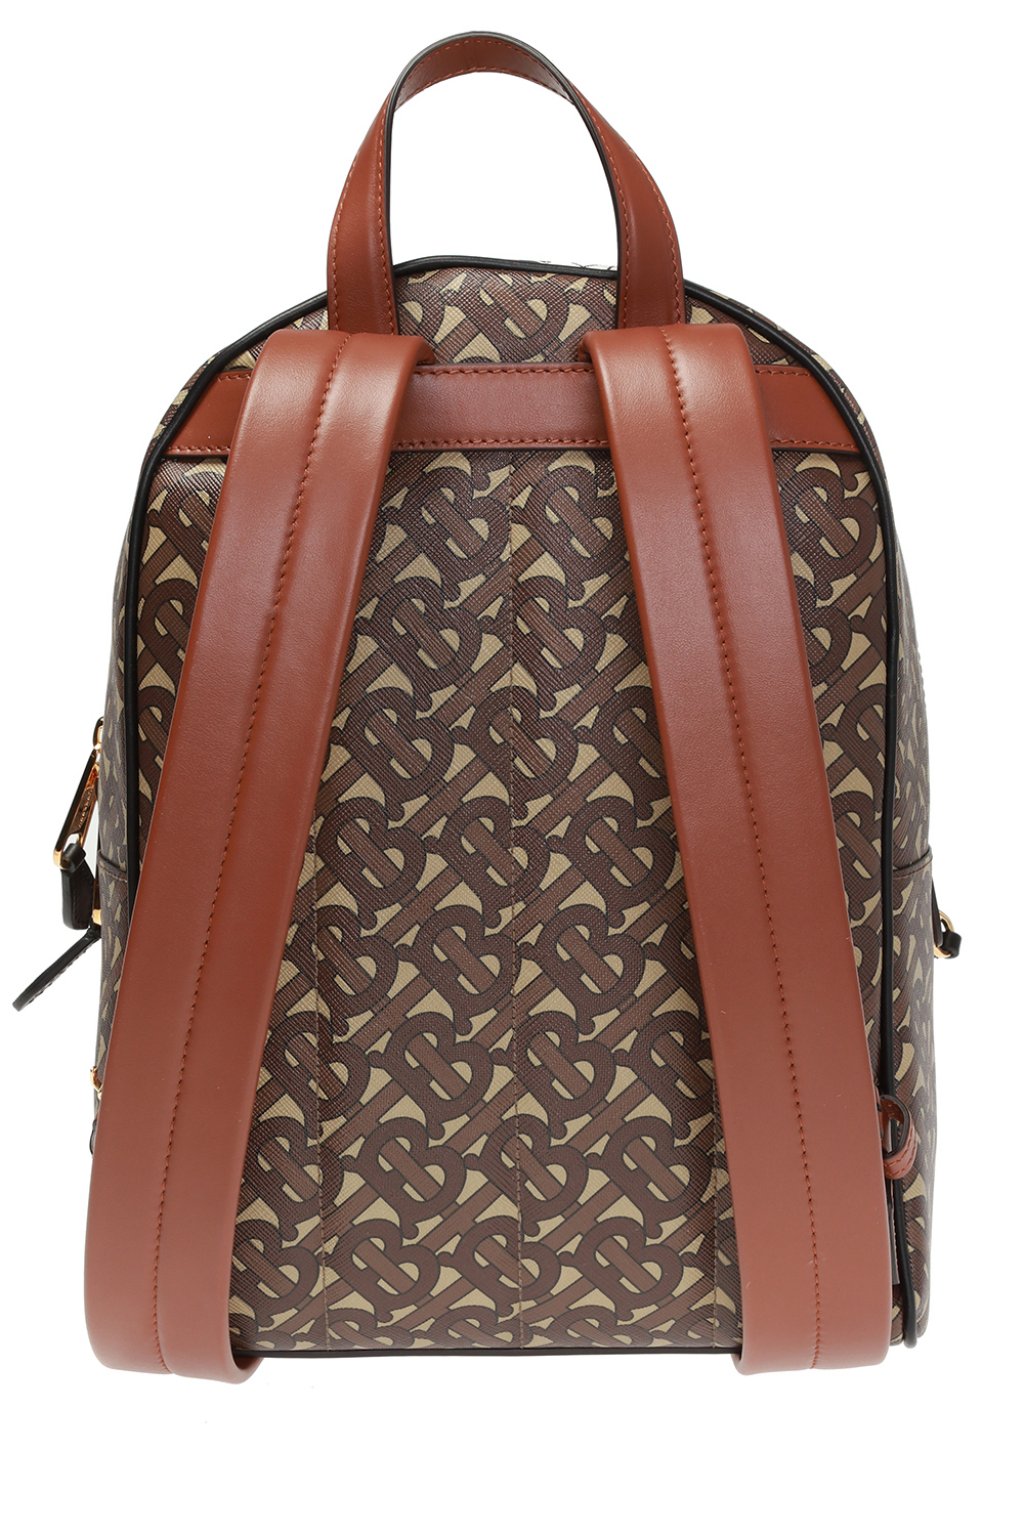 New BURBERRY JETT TB Monogram Stripe Bridle Brown Backpack Leather